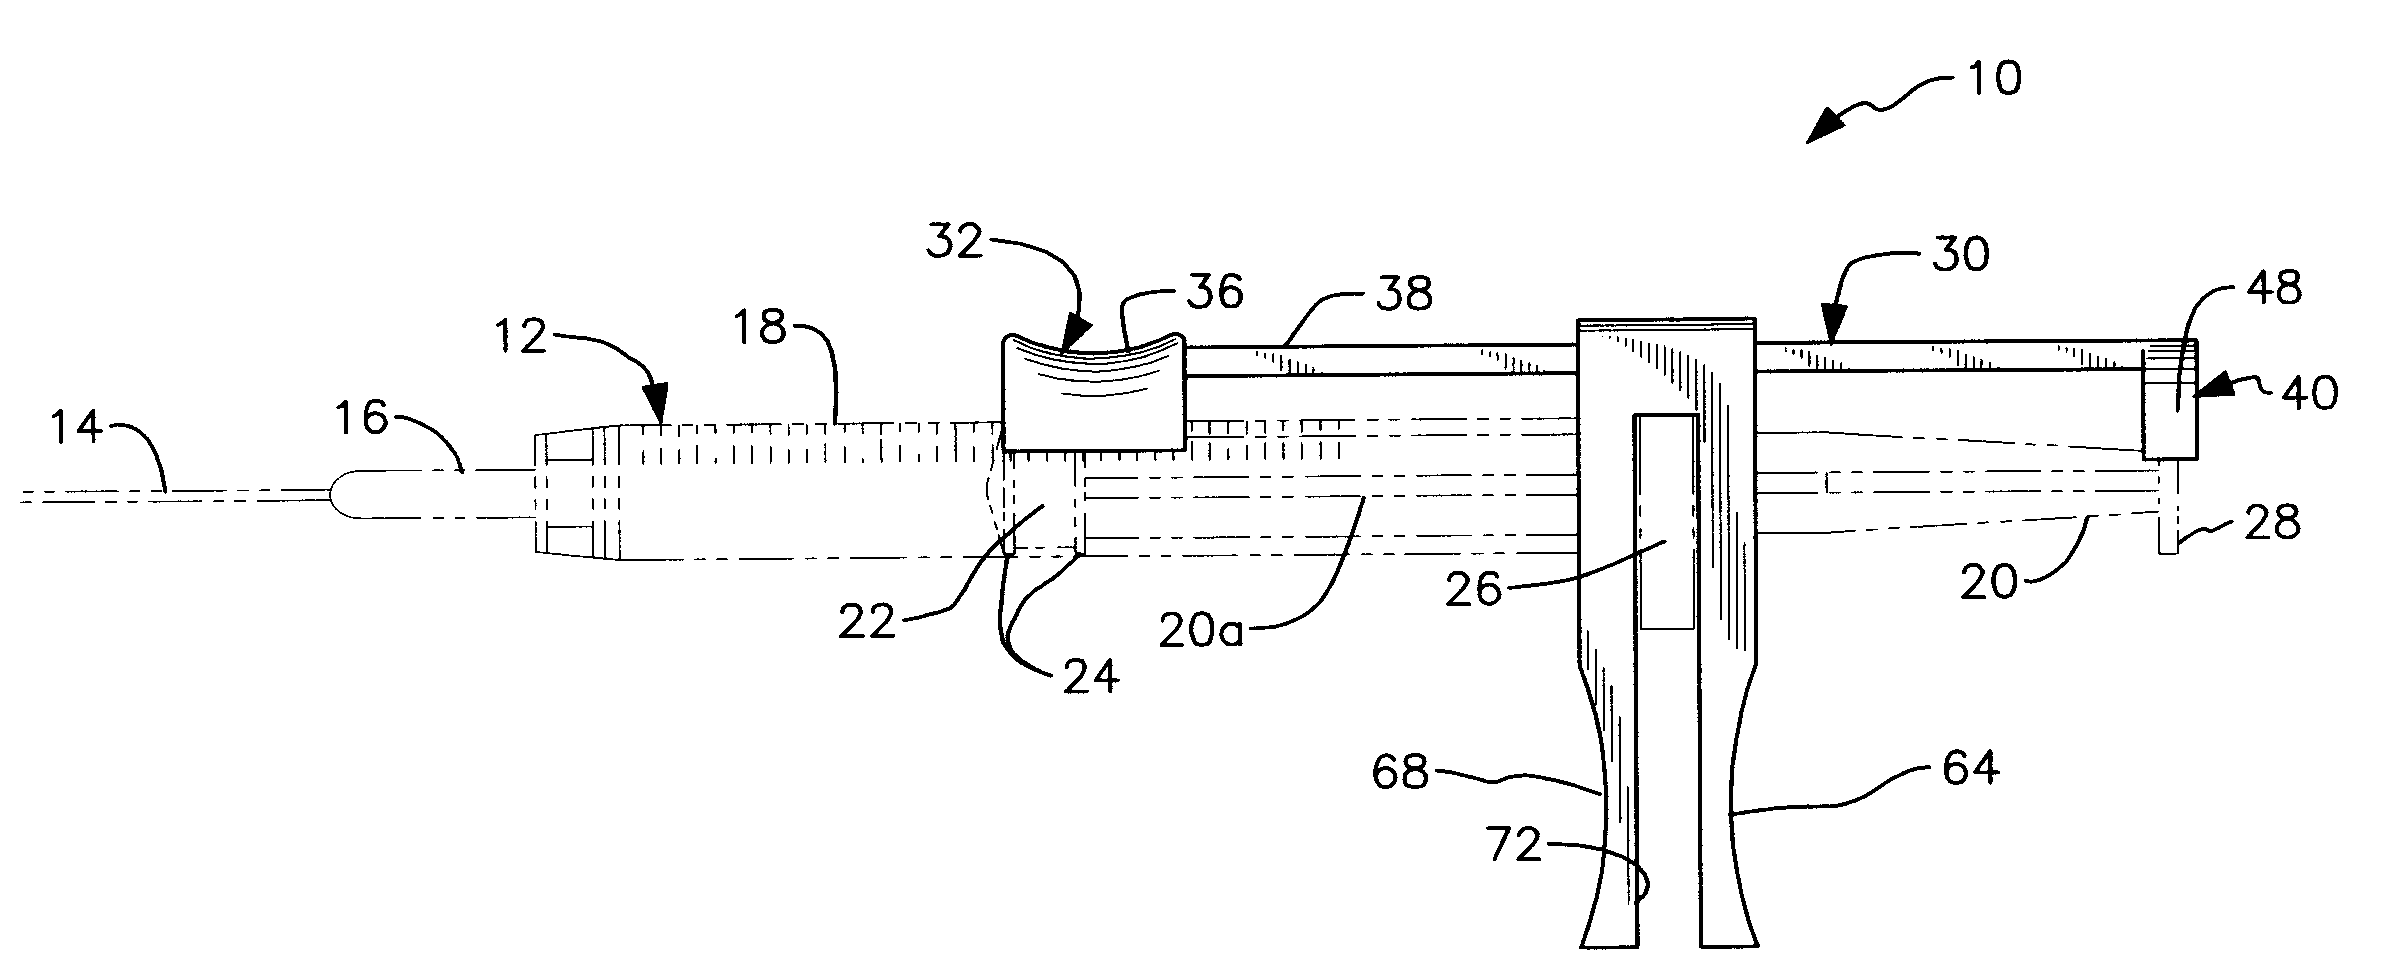 Forward-Mounted Plunger Control for Retrofit Attachment to an Existing Syringe